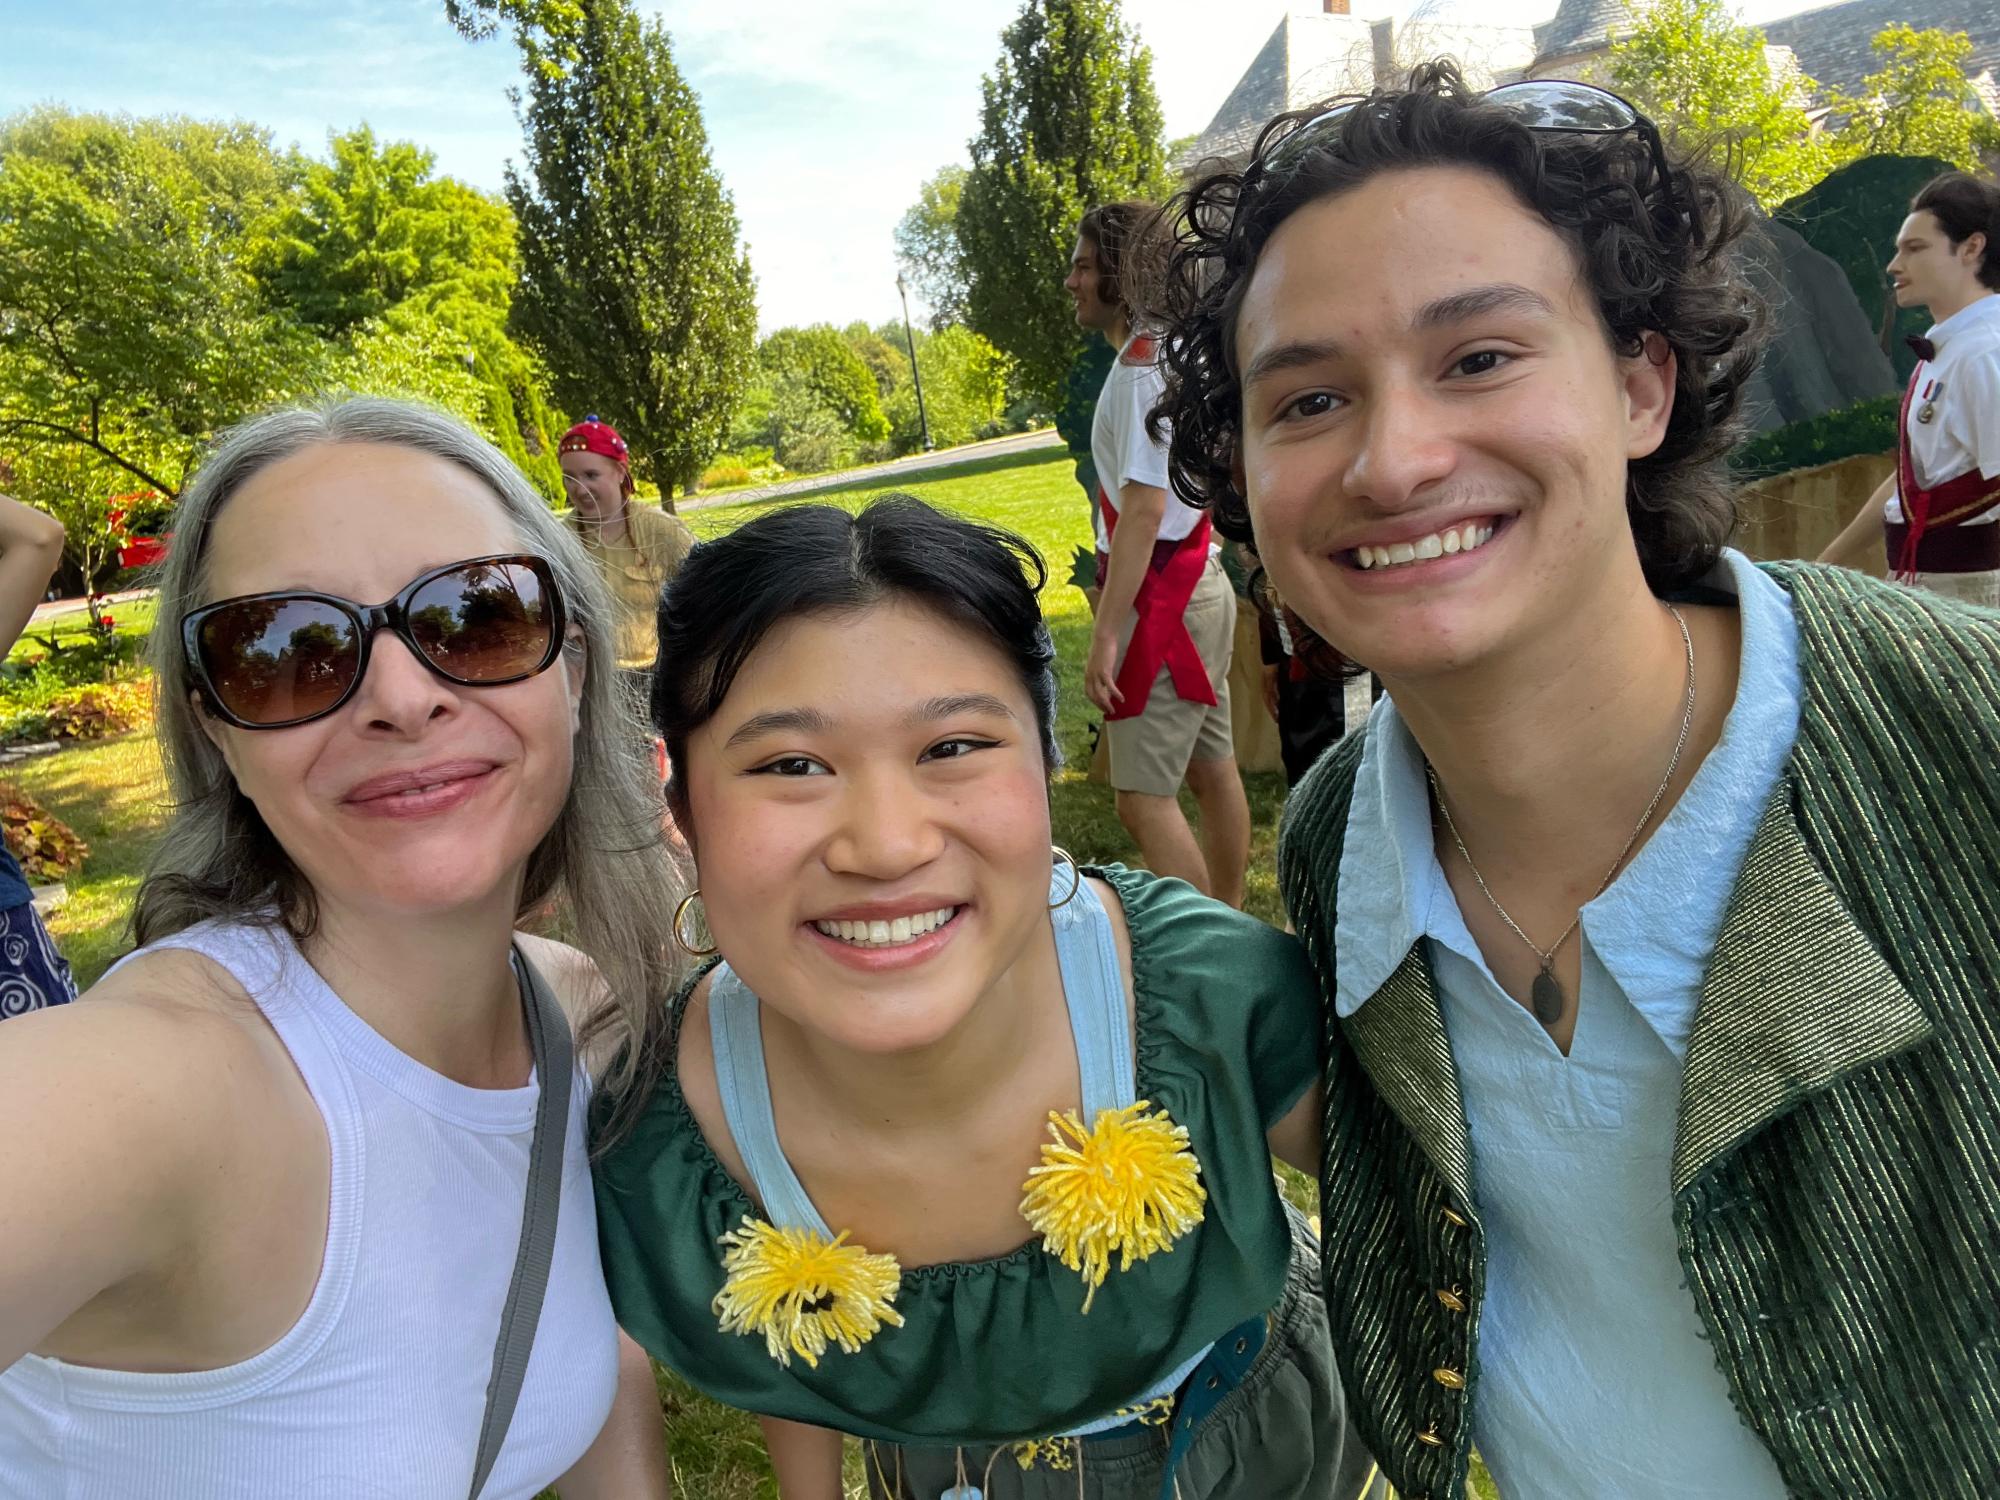 Quetta Carpenter takes a selfie with actors Mia Hsiung Nguyen and Dominic Gross after their outdoor performance